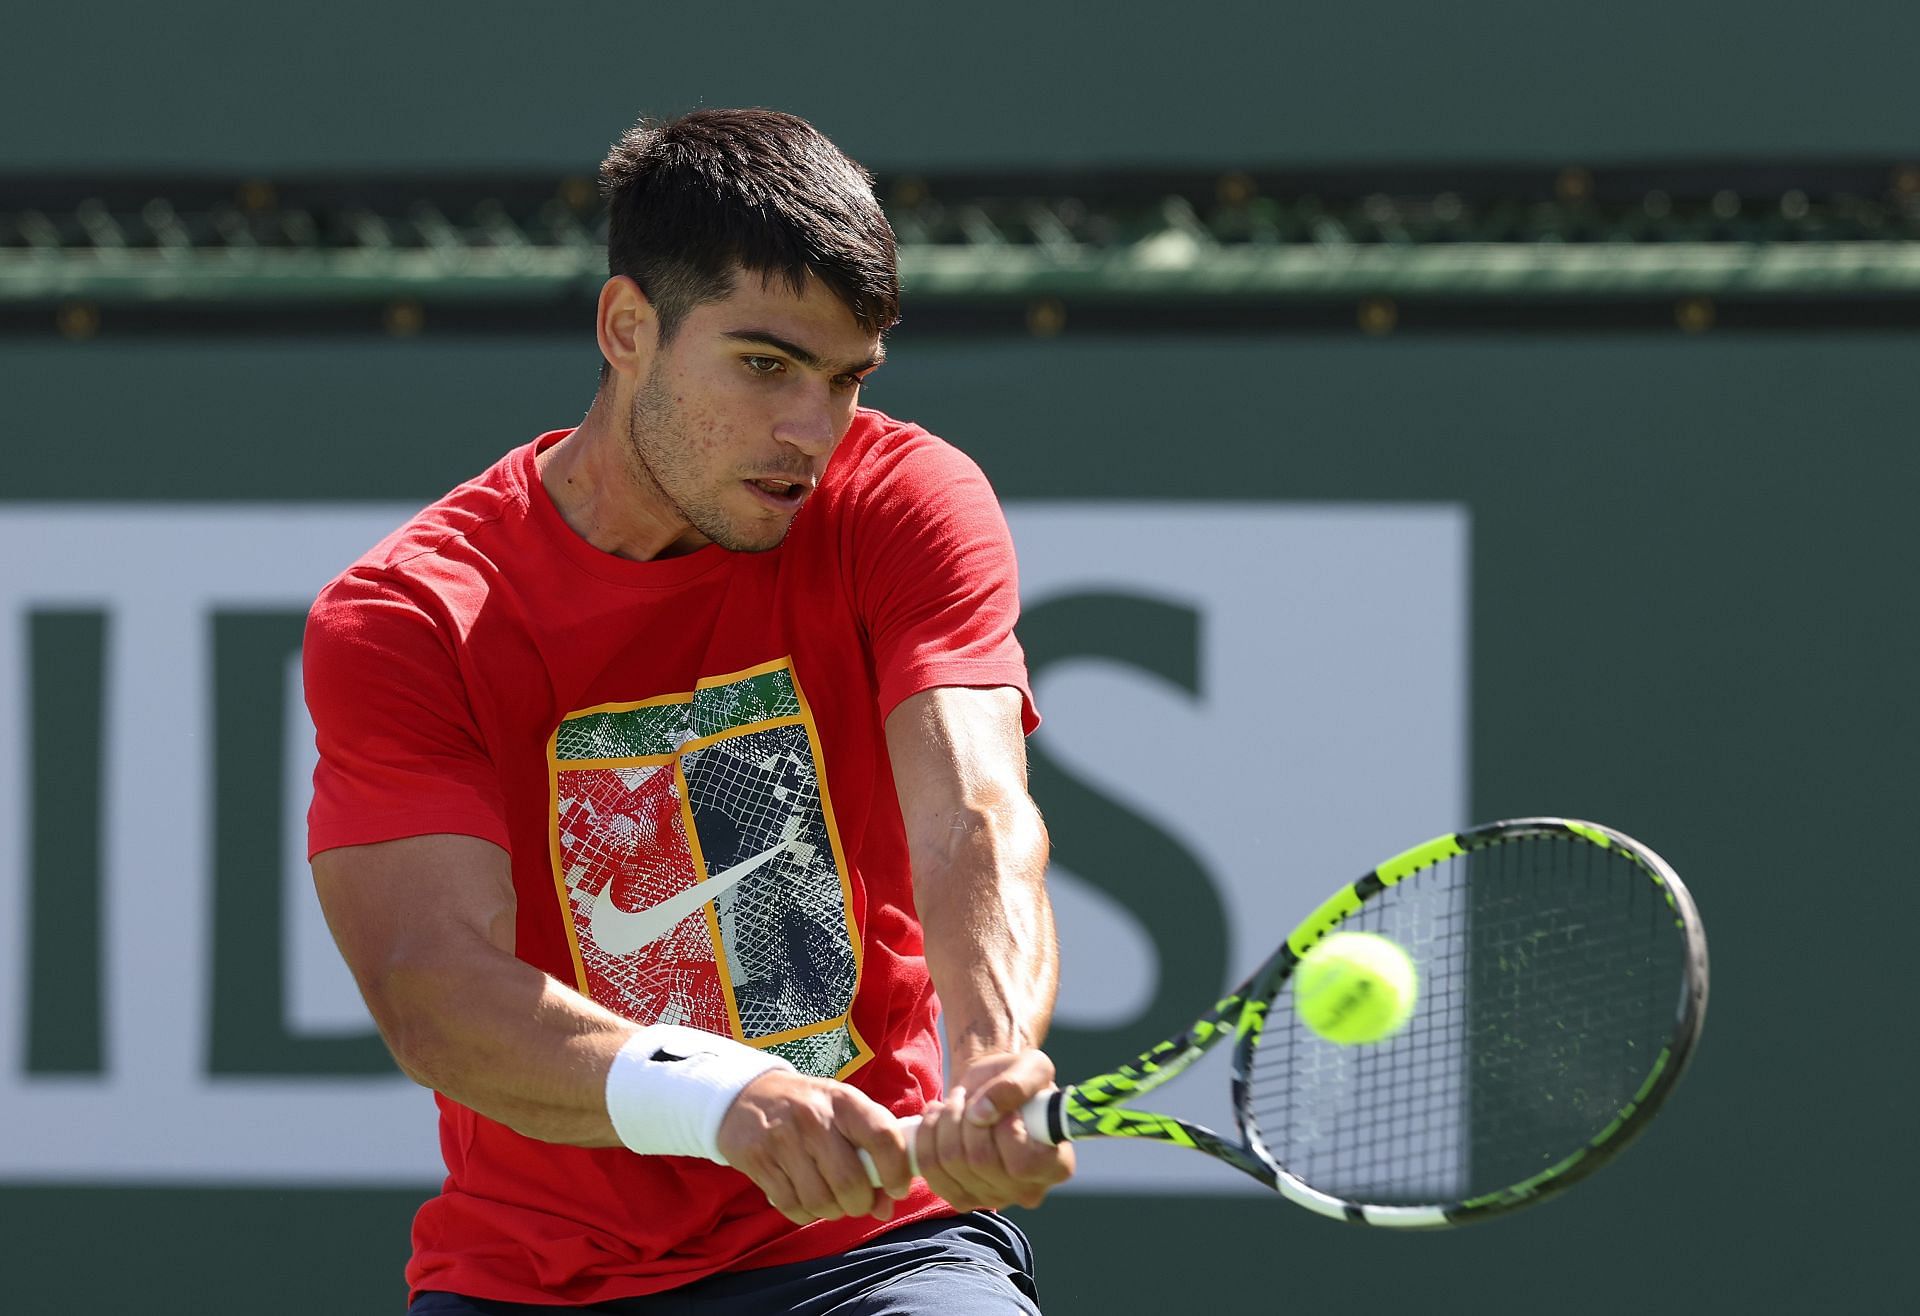 Carlos Alcaraz during a practice session at Indian Wells.